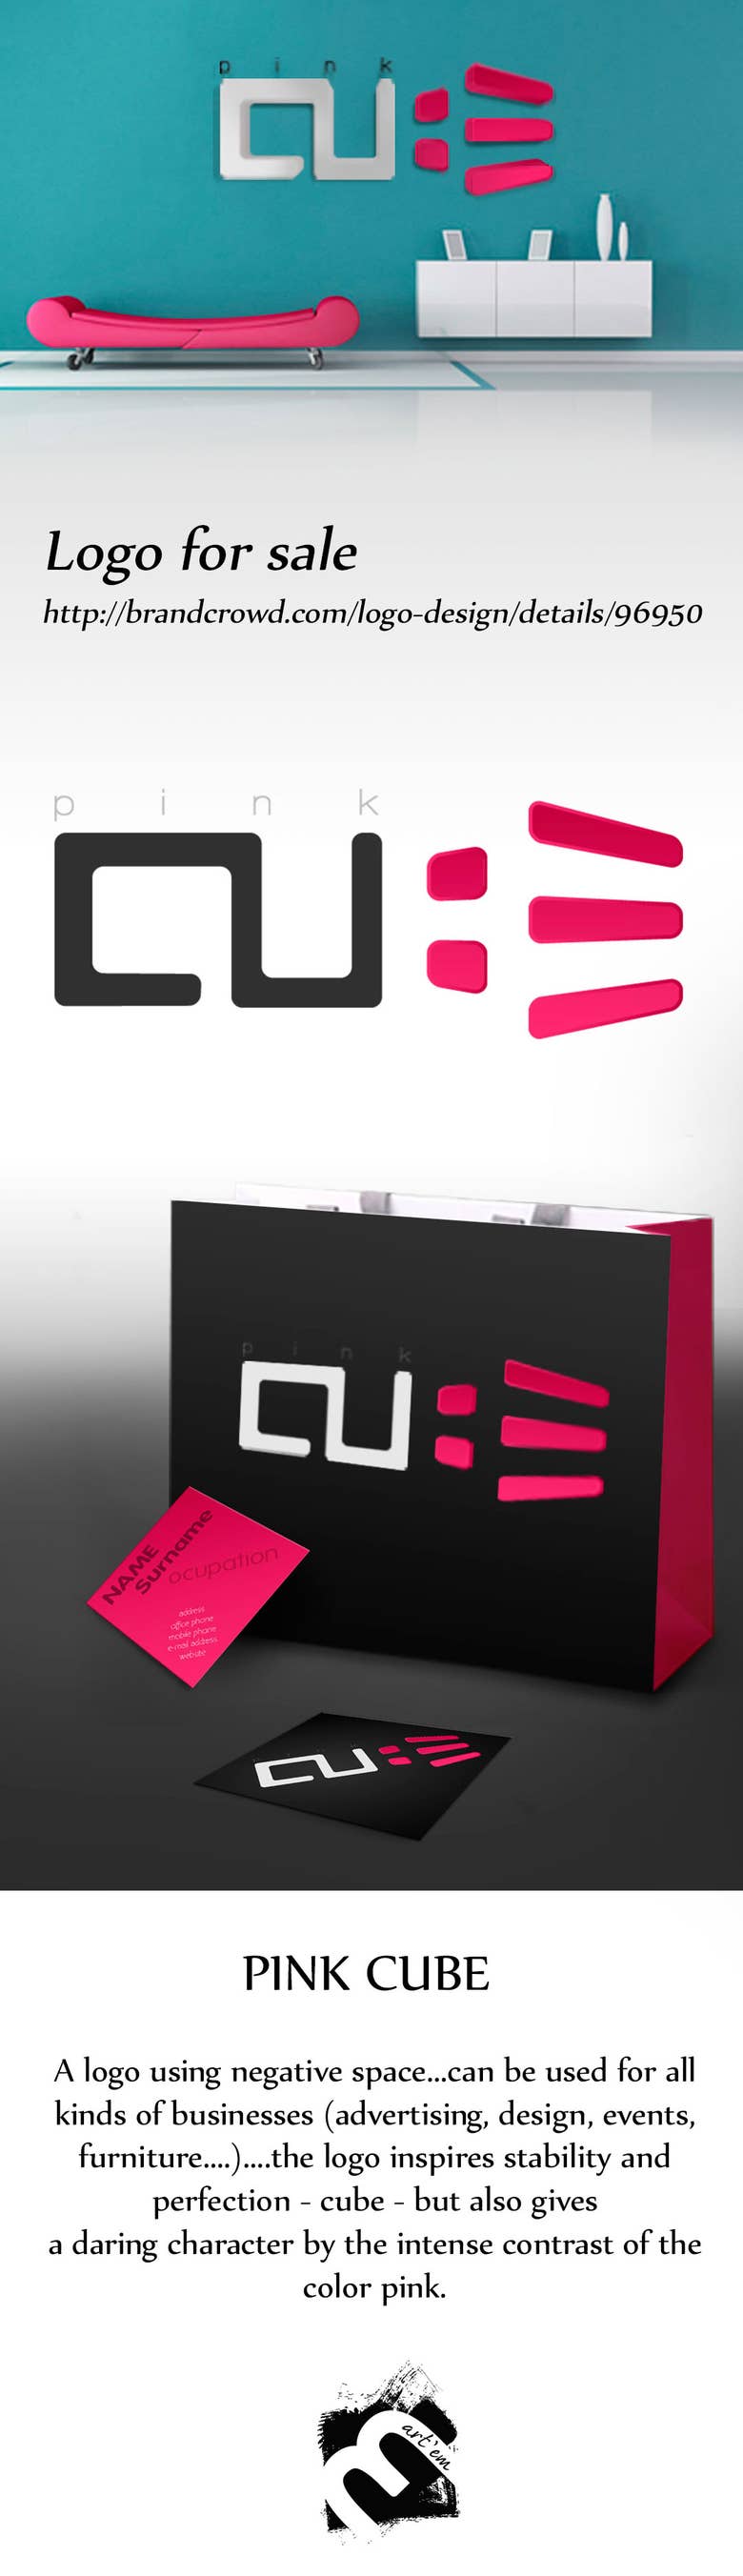 Branding for sale - Pink Cube